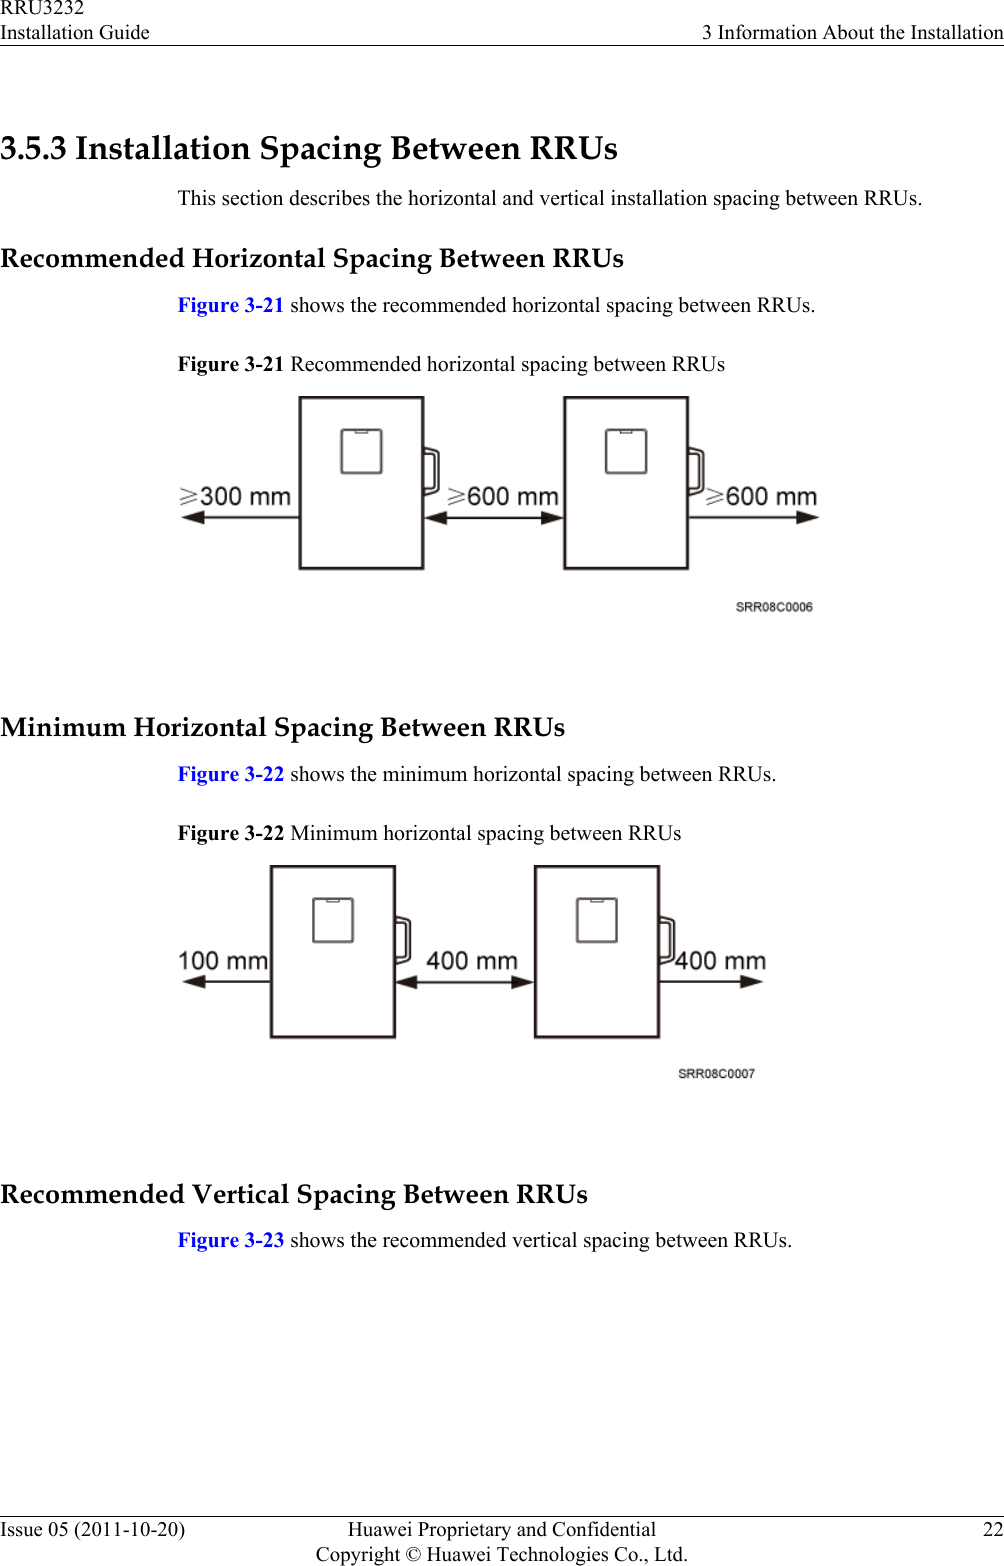  3.5.3 Installation Spacing Between RRUsThis section describes the horizontal and vertical installation spacing between RRUs.Recommended Horizontal Spacing Between RRUsFigure 3-21 shows the recommended horizontal spacing between RRUs.Figure 3-21 Recommended horizontal spacing between RRUs Minimum Horizontal Spacing Between RRUsFigure 3-22 shows the minimum horizontal spacing between RRUs.Figure 3-22 Minimum horizontal spacing between RRUs Recommended Vertical Spacing Between RRUsFigure 3-23 shows the recommended vertical spacing between RRUs.RRU3232Installation Guide 3 Information About the InstallationIssue 05 (2011-10-20) Huawei Proprietary and ConfidentialCopyright © Huawei Technologies Co., Ltd.22